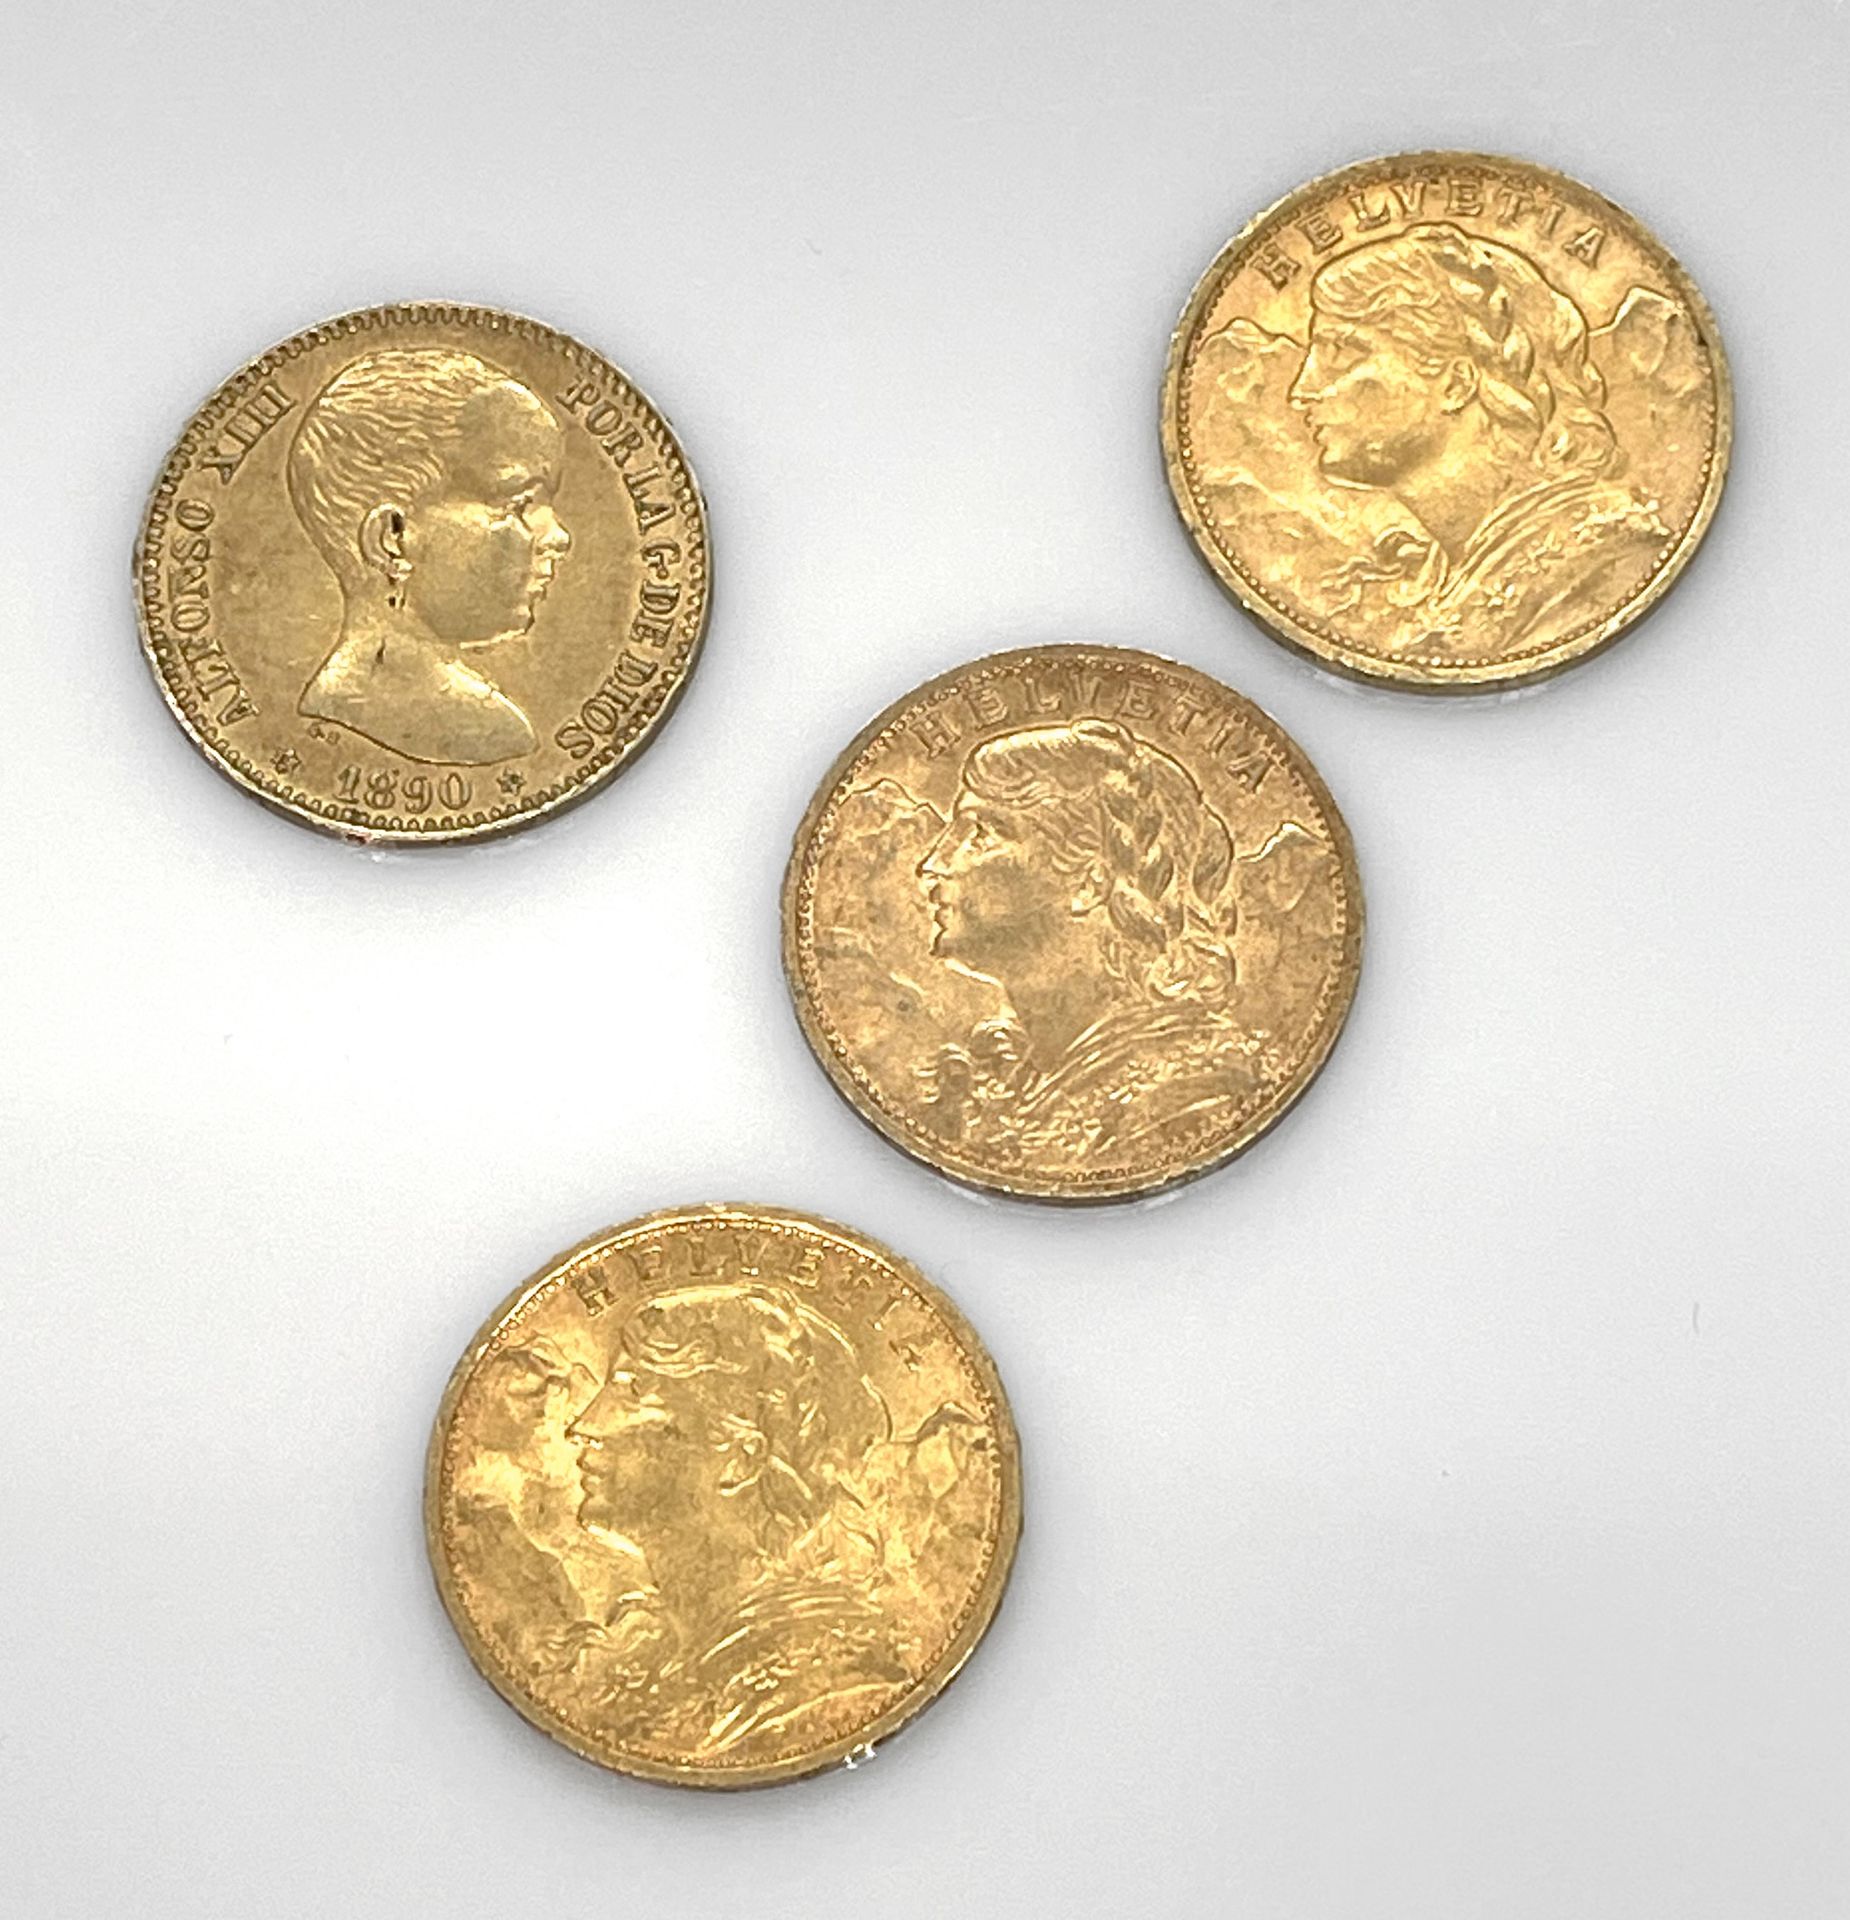 Null FOUR GOLDEN PIECES: Three 20 f Swiss coins and one 20 peseta Spanish coin